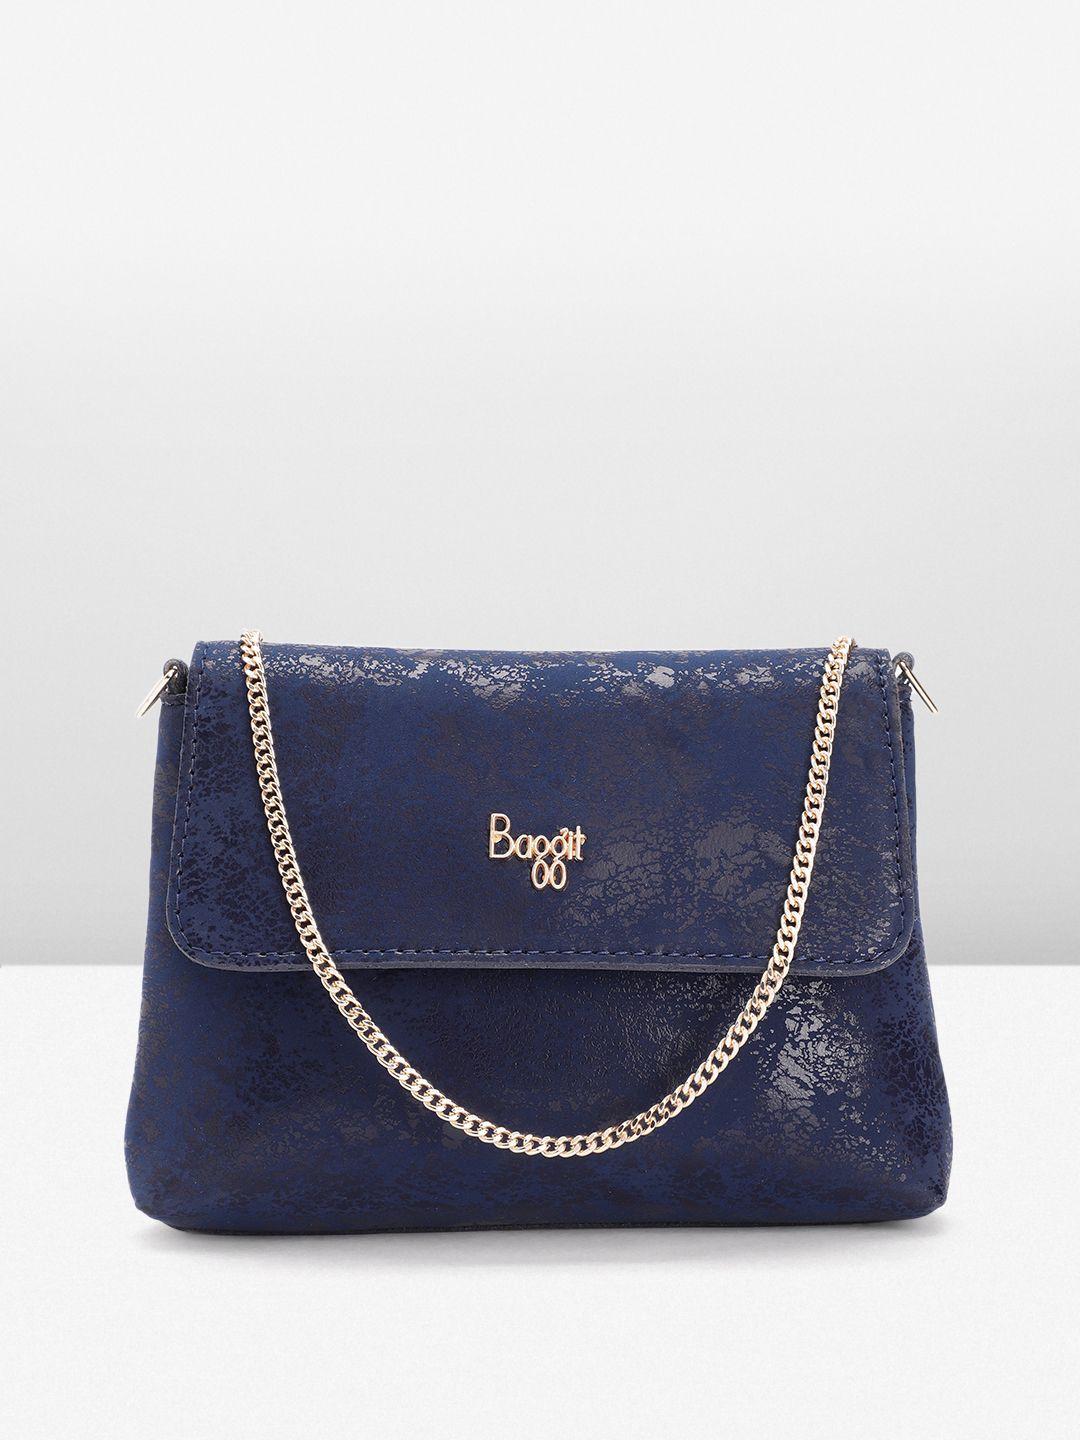 baggit-textured-foldover-clutch-with-detachable-strap